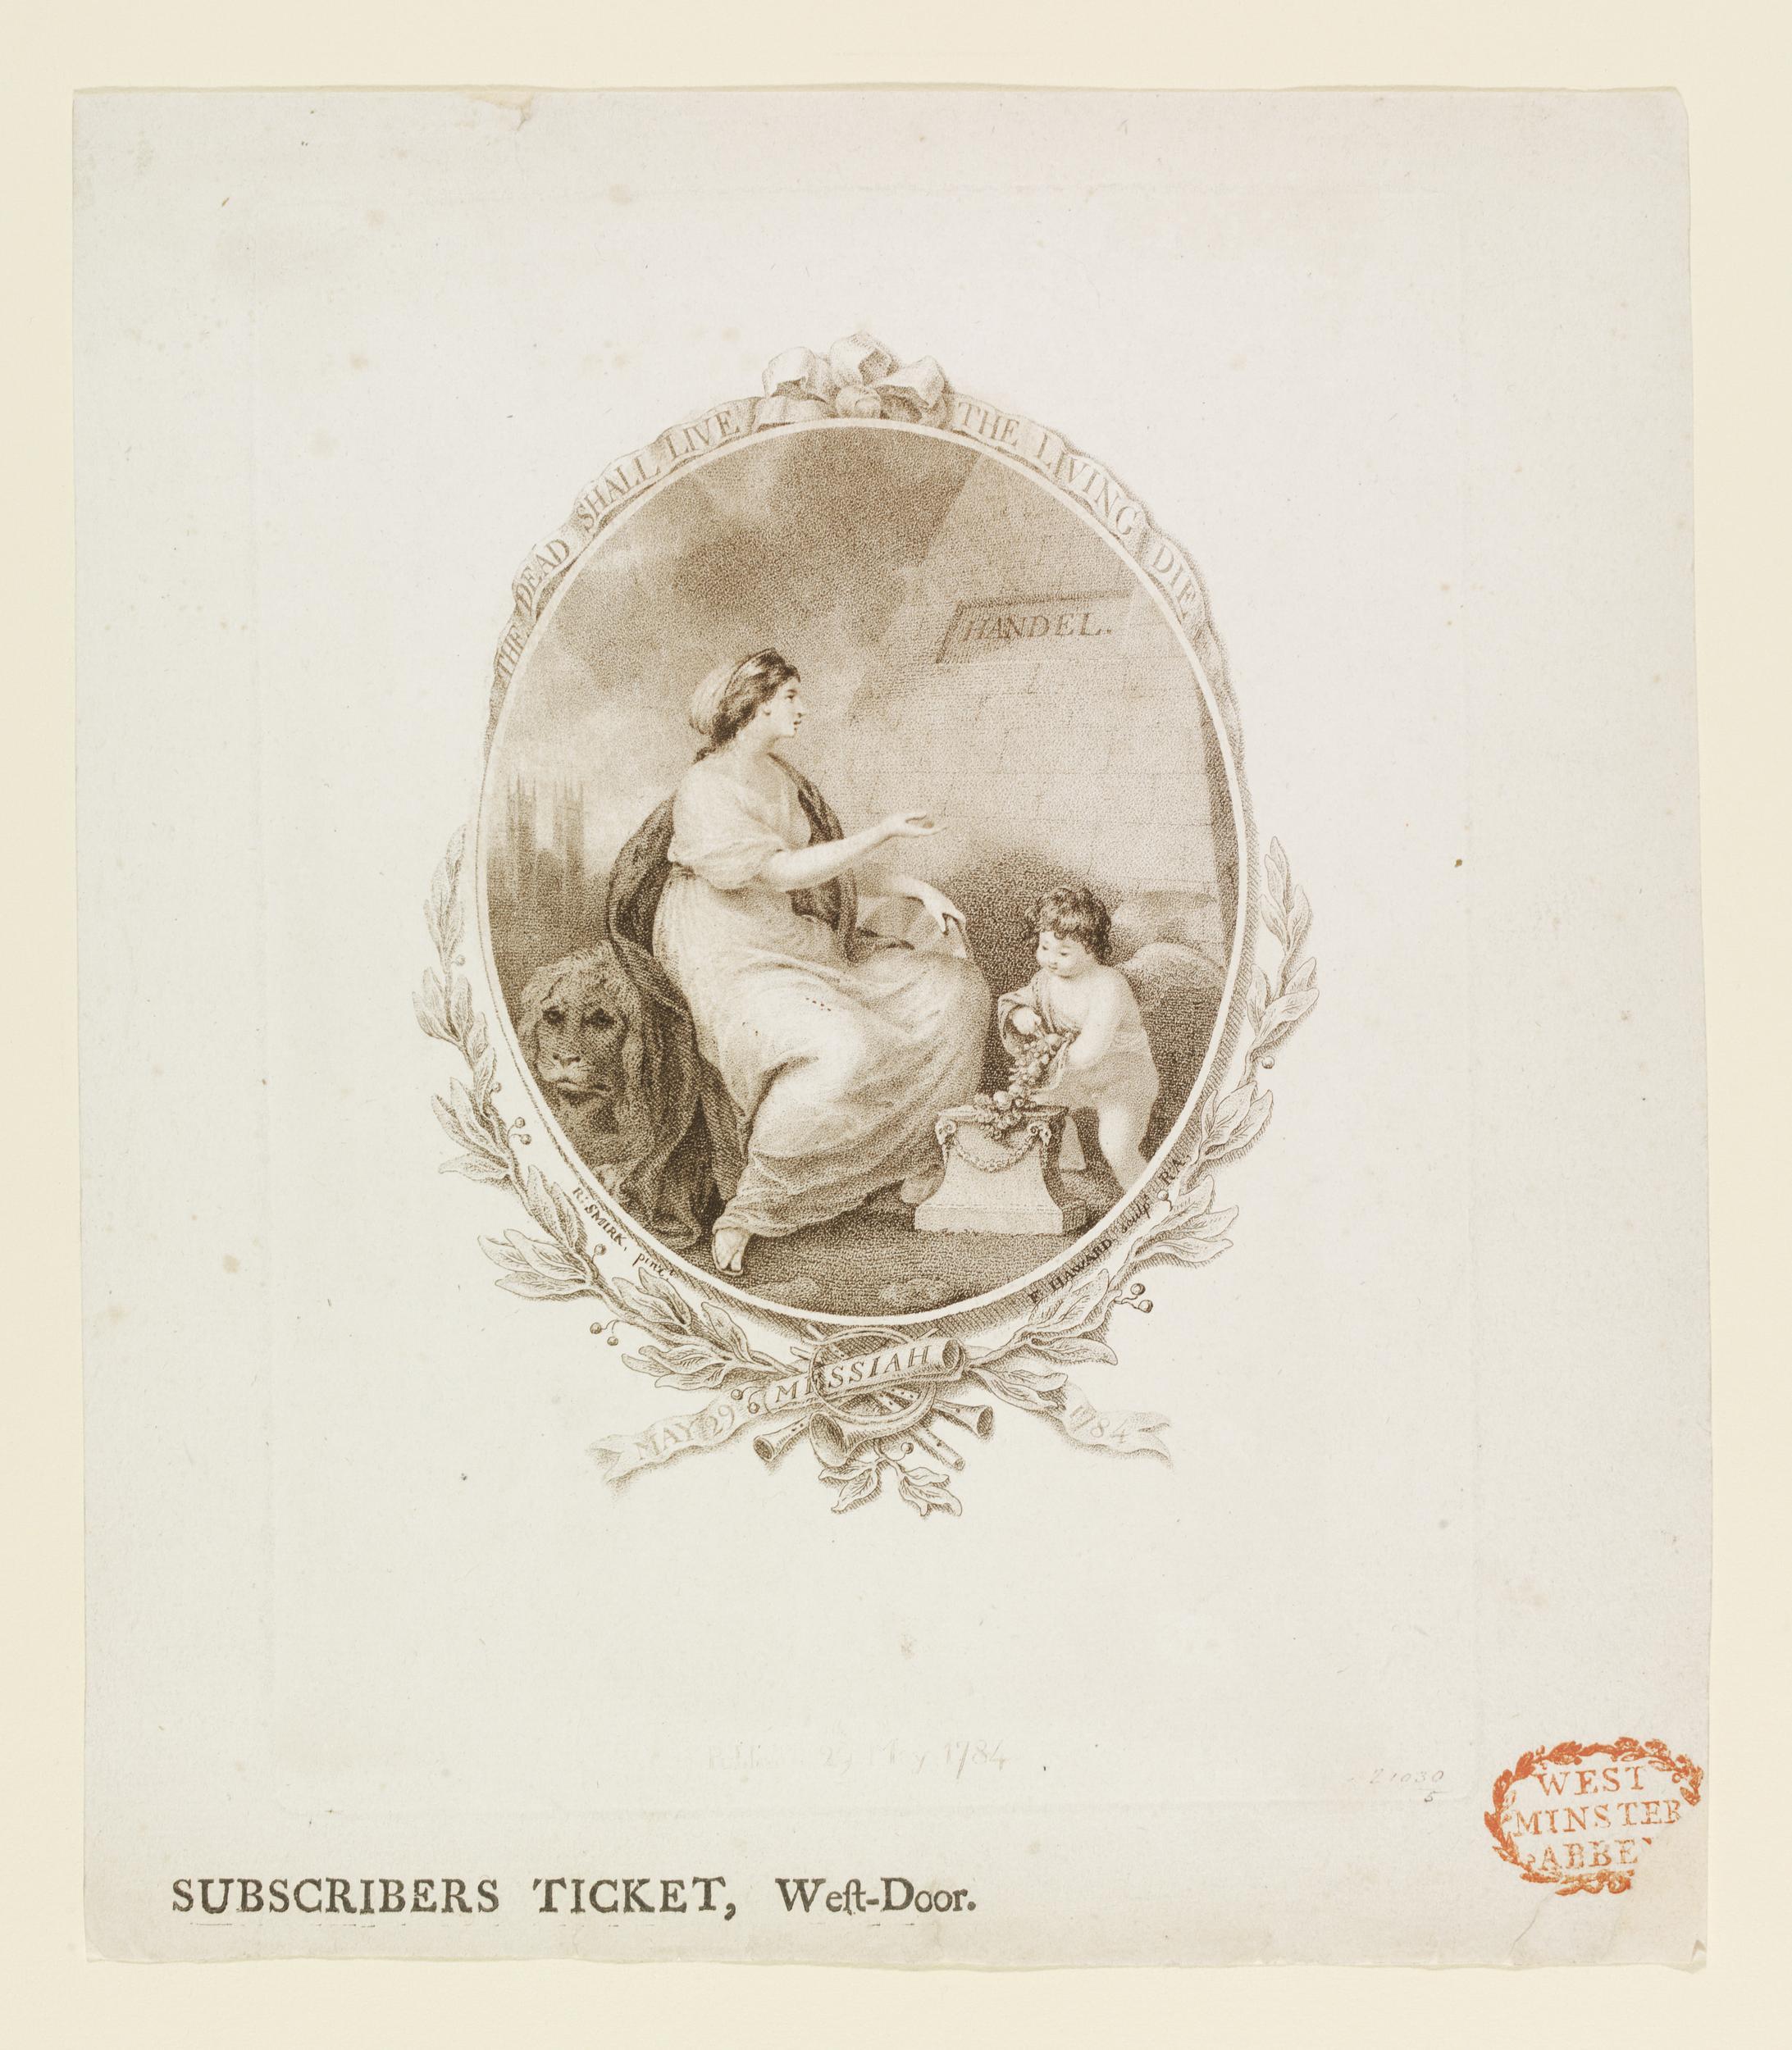 Subscriber's ticket for a Handel Commemoration Concert of Messiah on 29th May 1784. For the 'West-Door'. A central ovoid design, featuring a woman and cherub next to Handel's tomb, framed with foliage and a banner. Etching and stipple engraving. This ticket relates to the design E.1228-1948 in respect of the principal figure at the tomb but there are many differences.